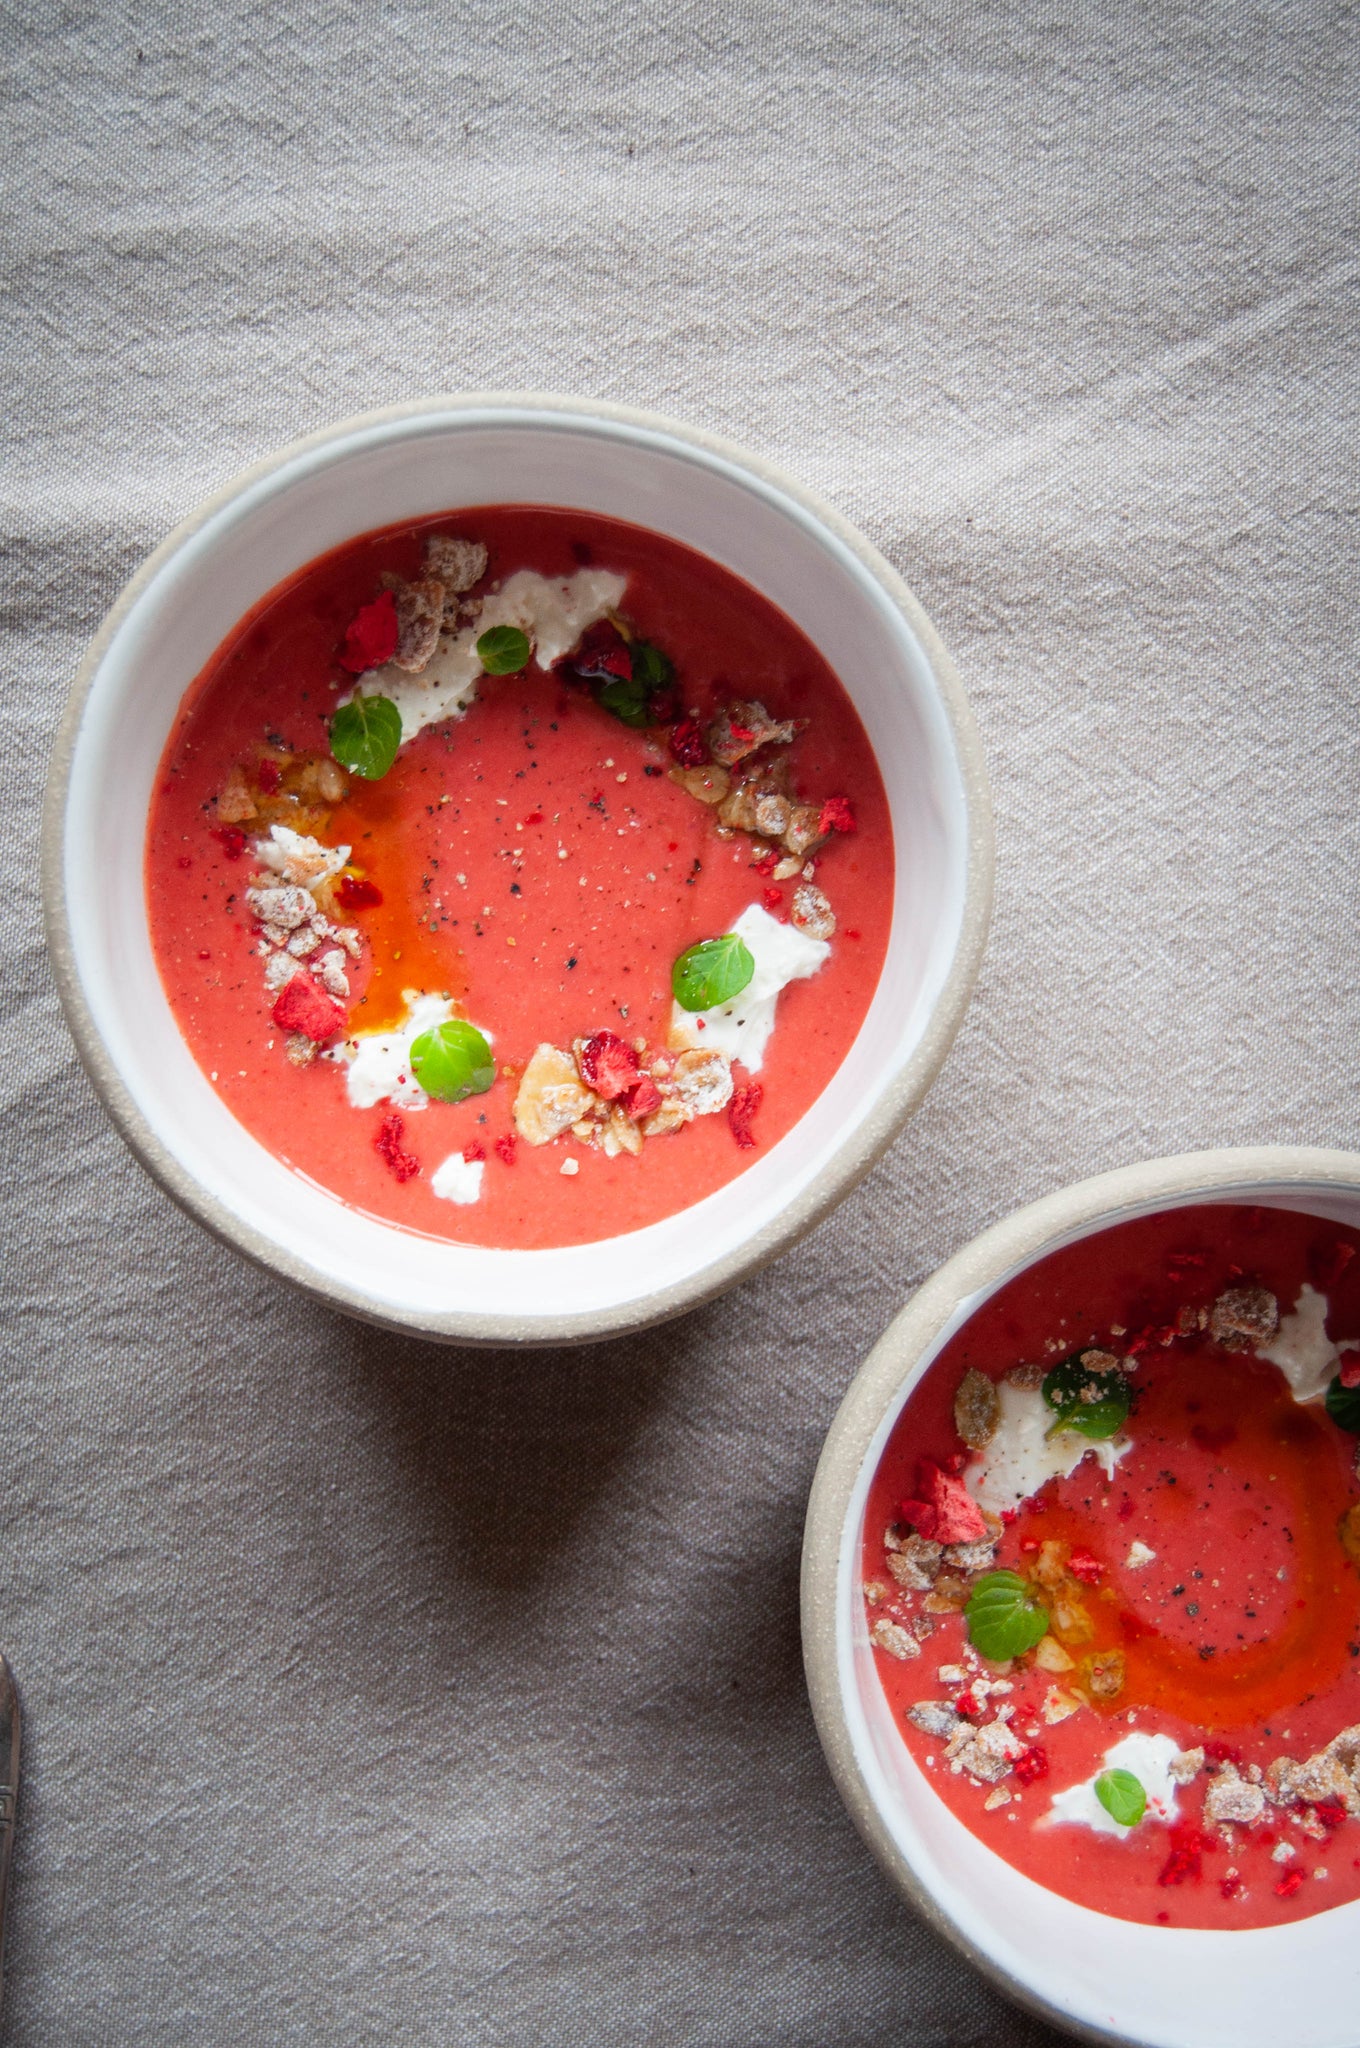 Gazpacho doesn't always need to be made with tomatoes. This one is made from strawberries, then paired with creamy burrata, lemon mint, and sharp cheddar granola from bumble & butter to add a bit of crunch.